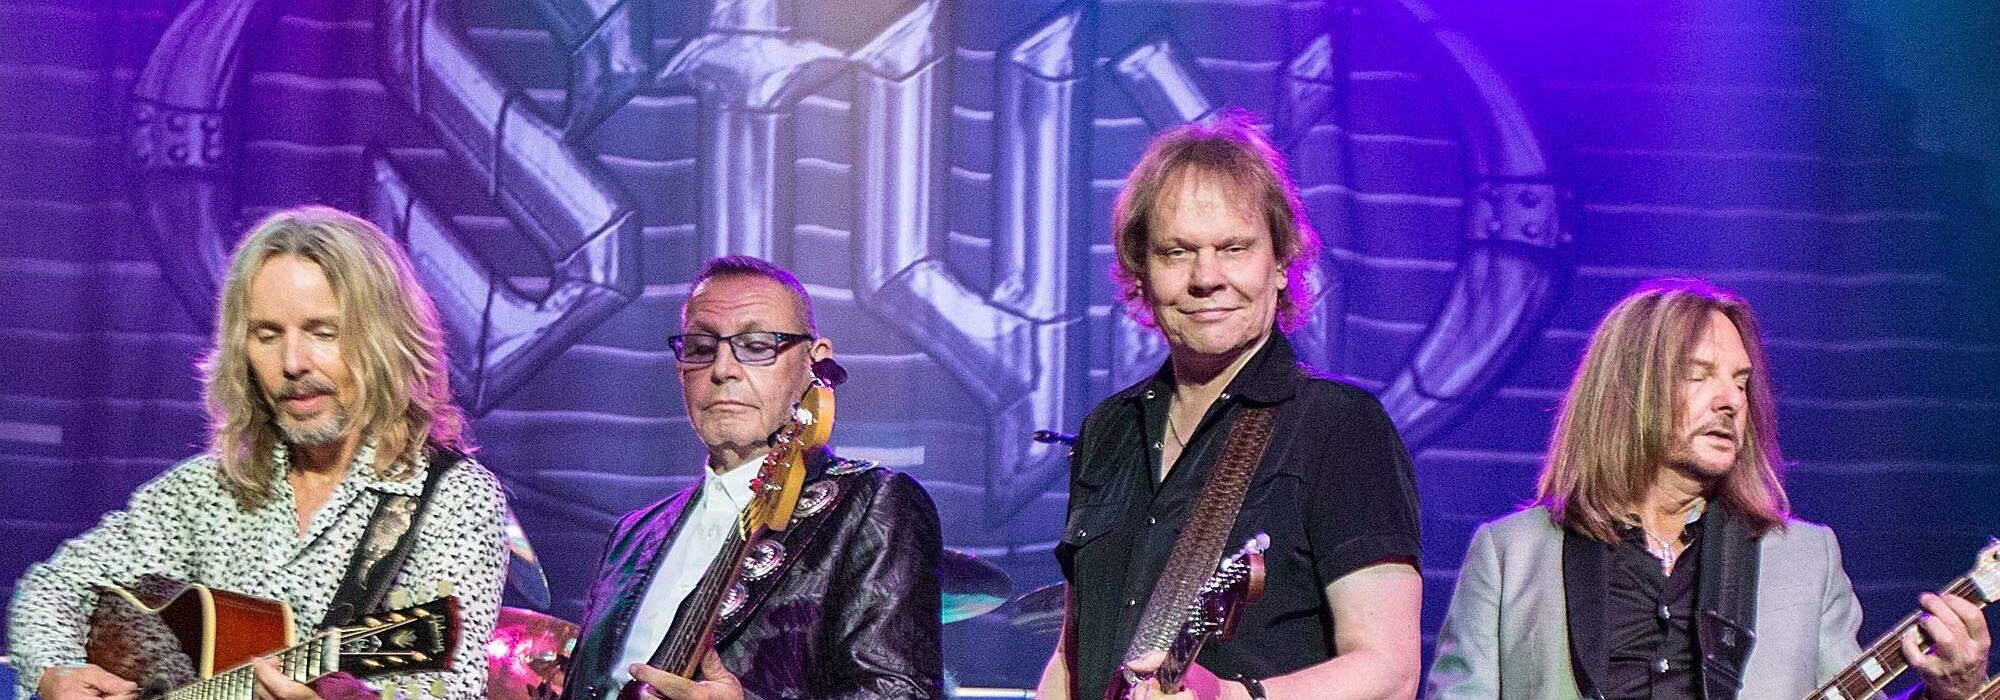 A Styx live event